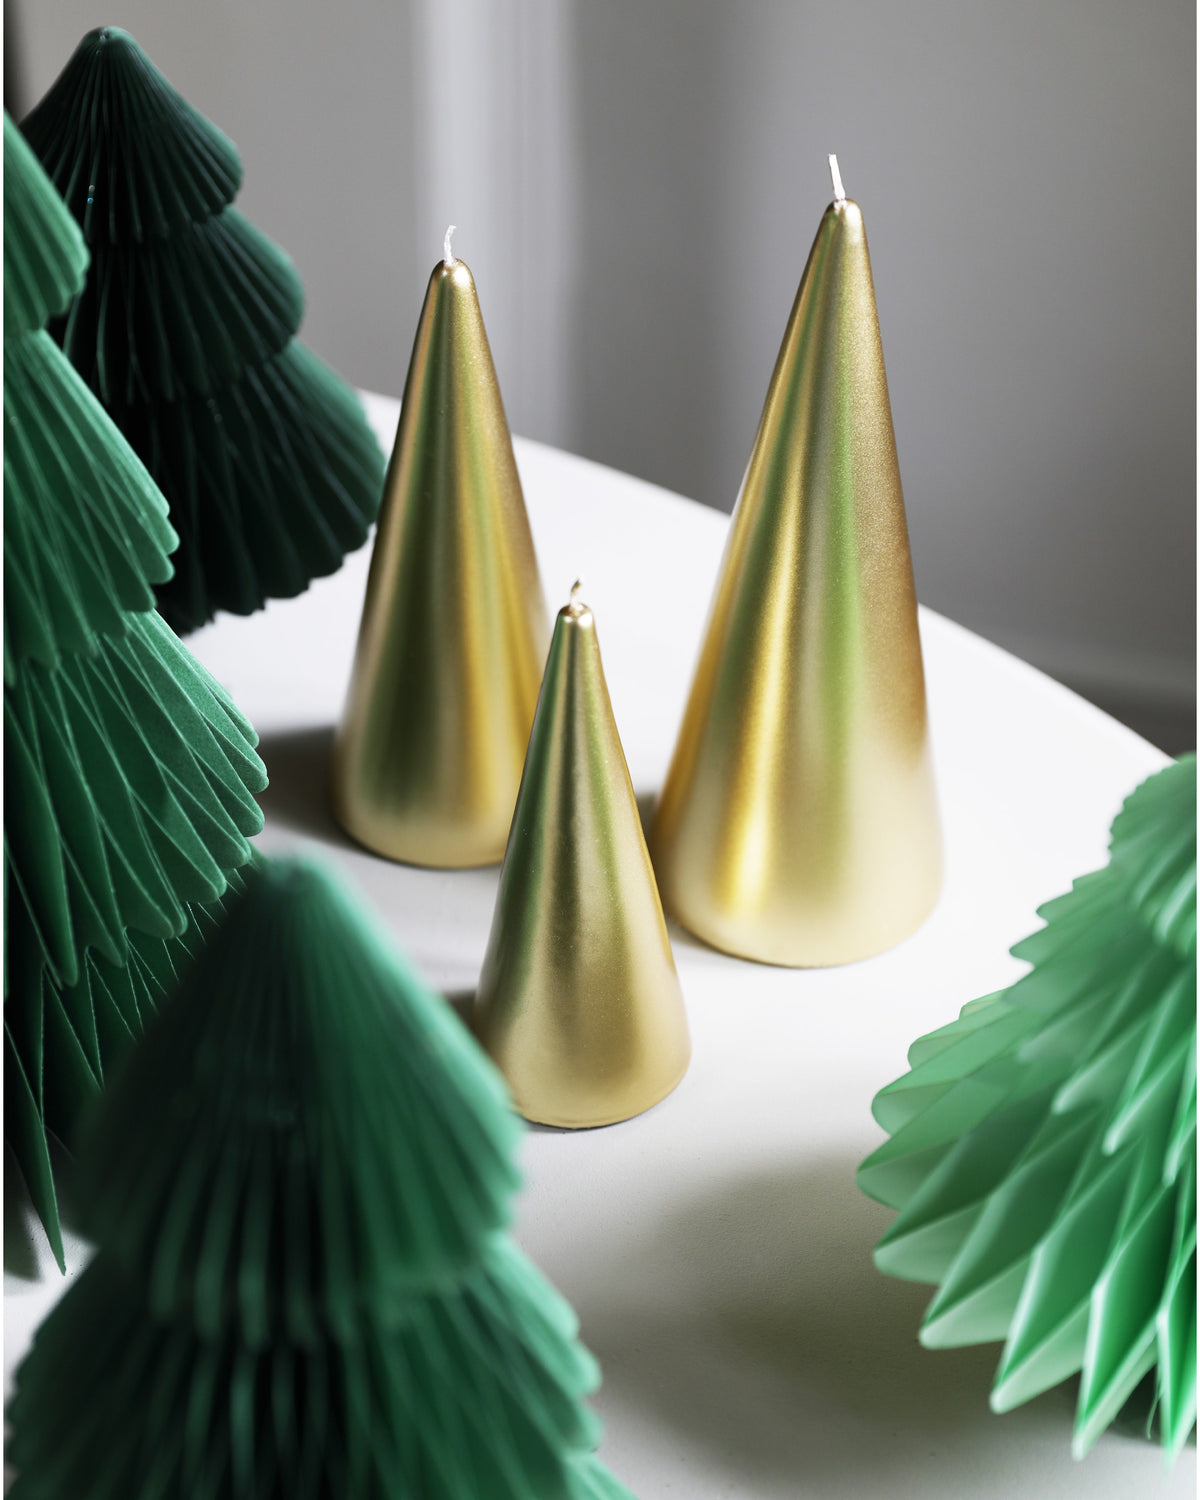 Small Mint Paper Christmas Tree | Undisclosed